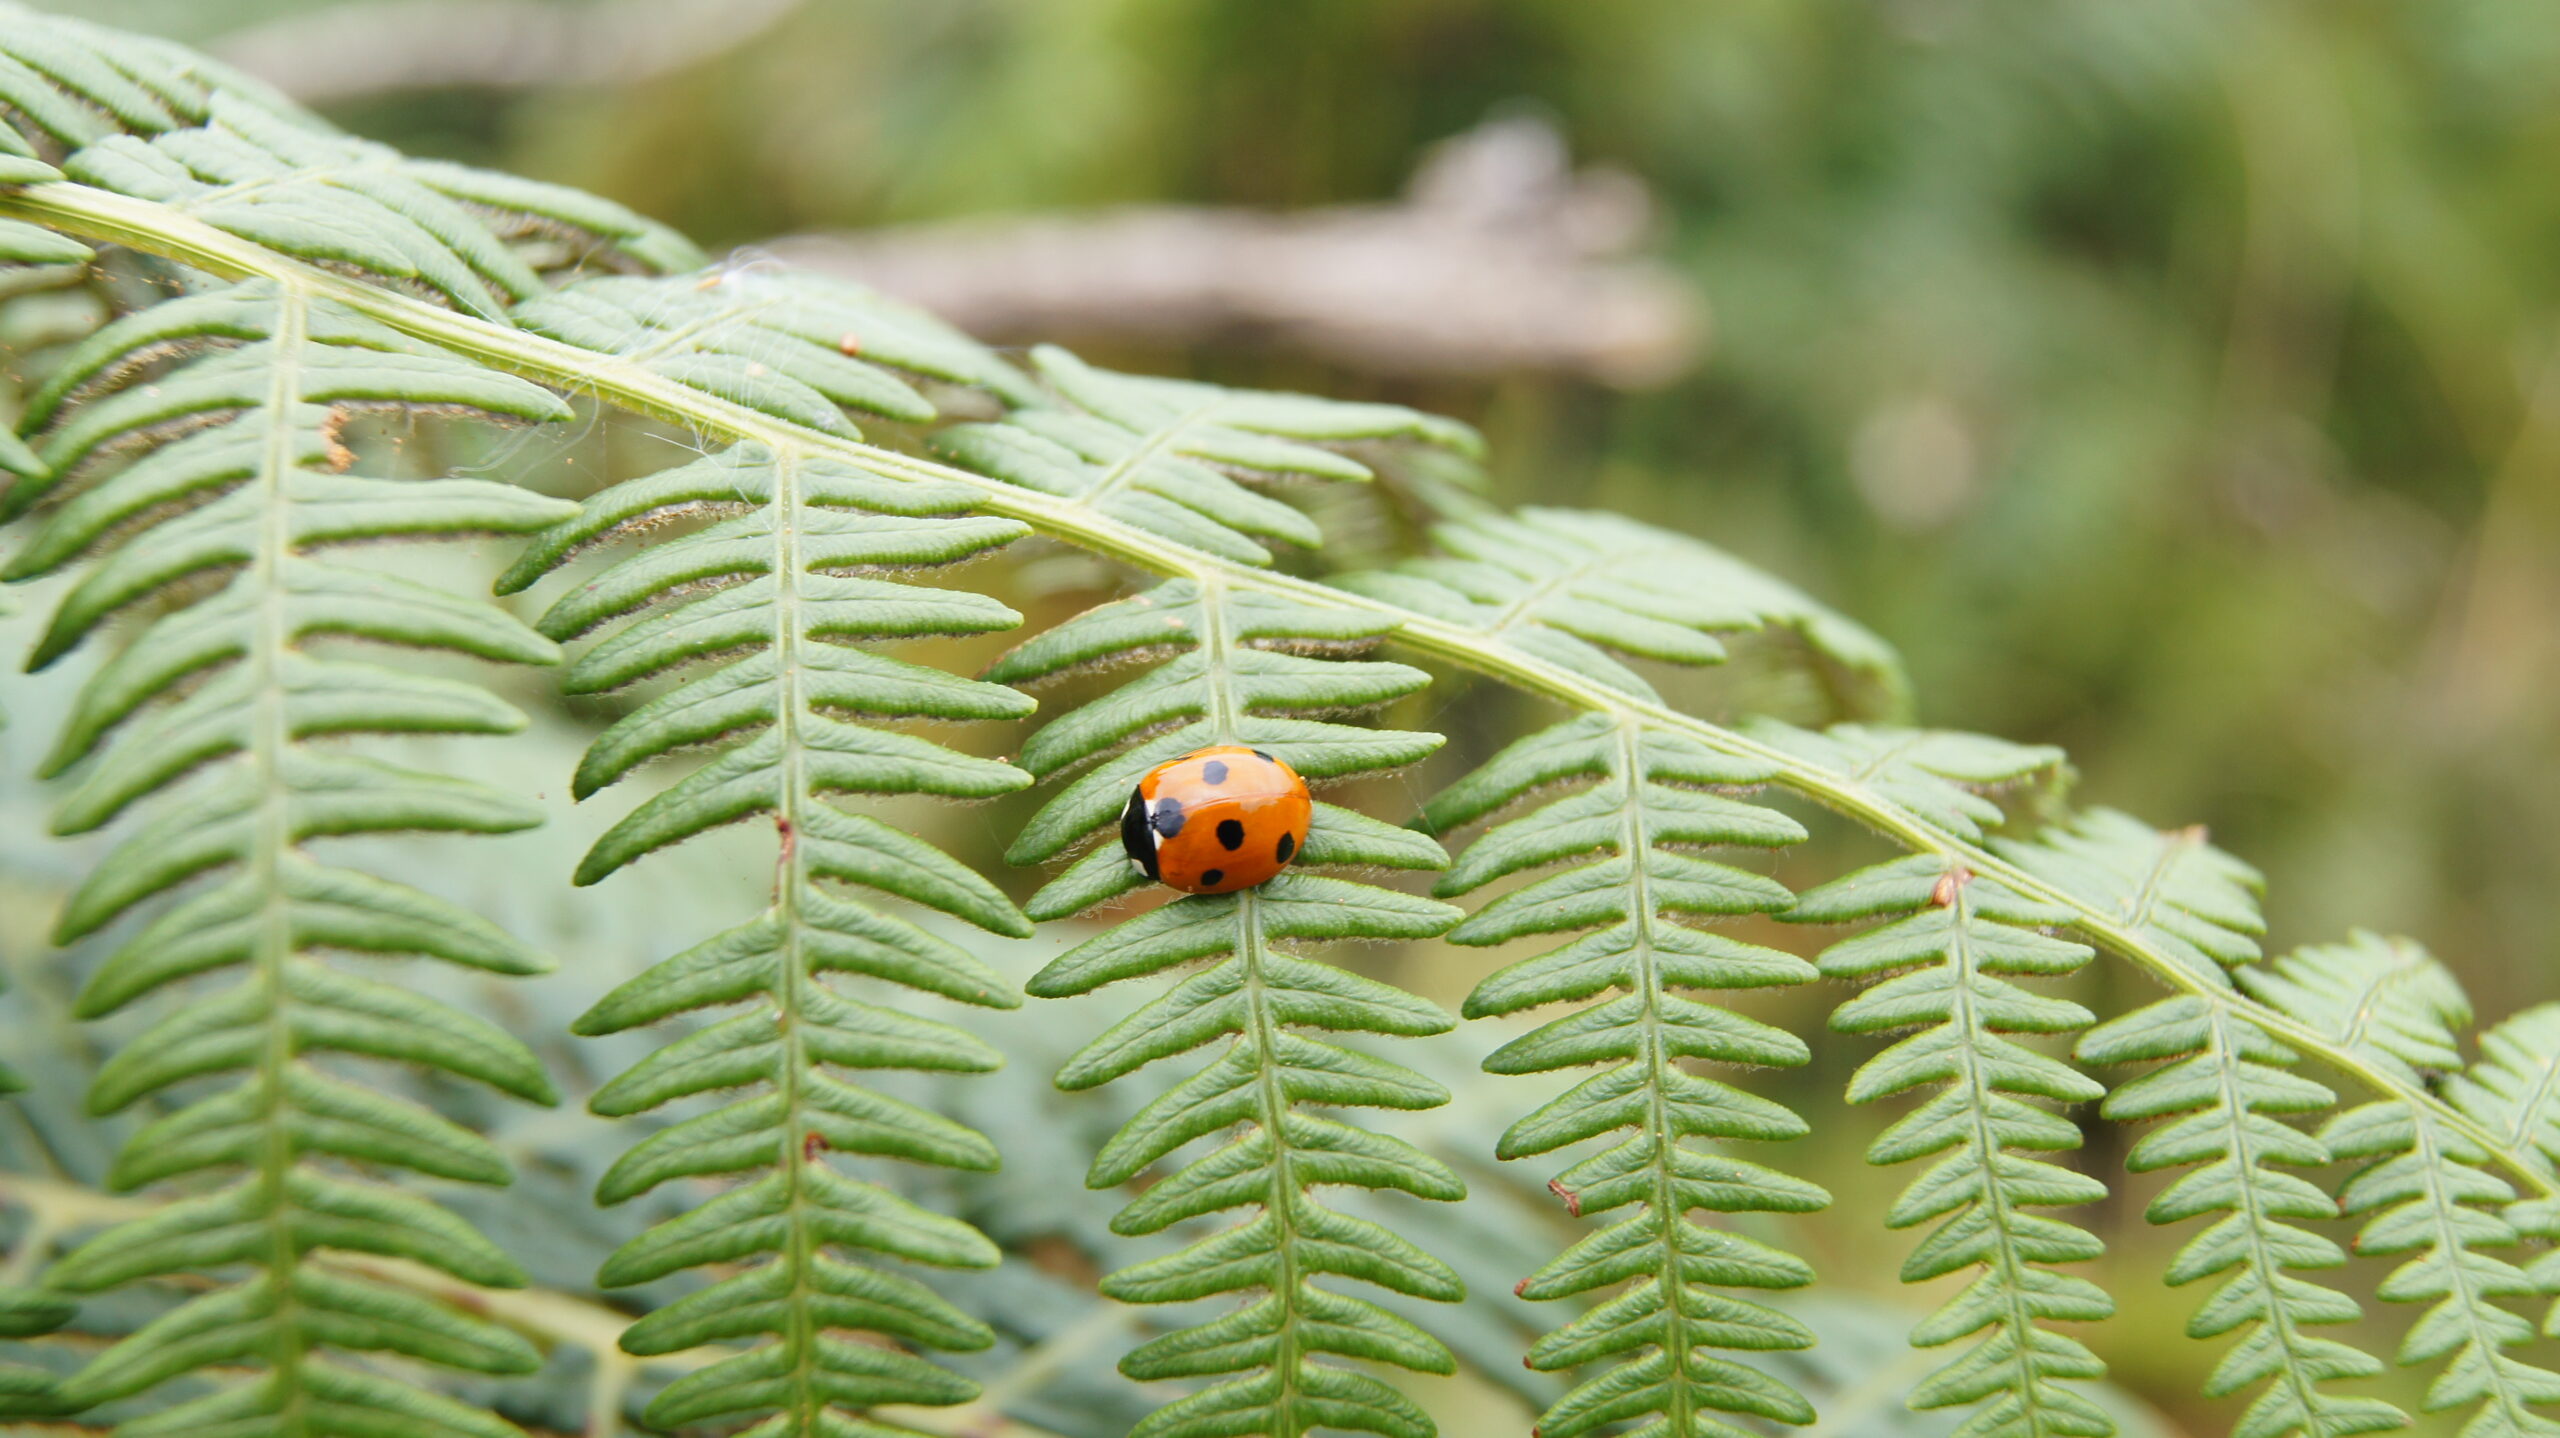 A ladybird on a fern leaf that I photographed in Ireland